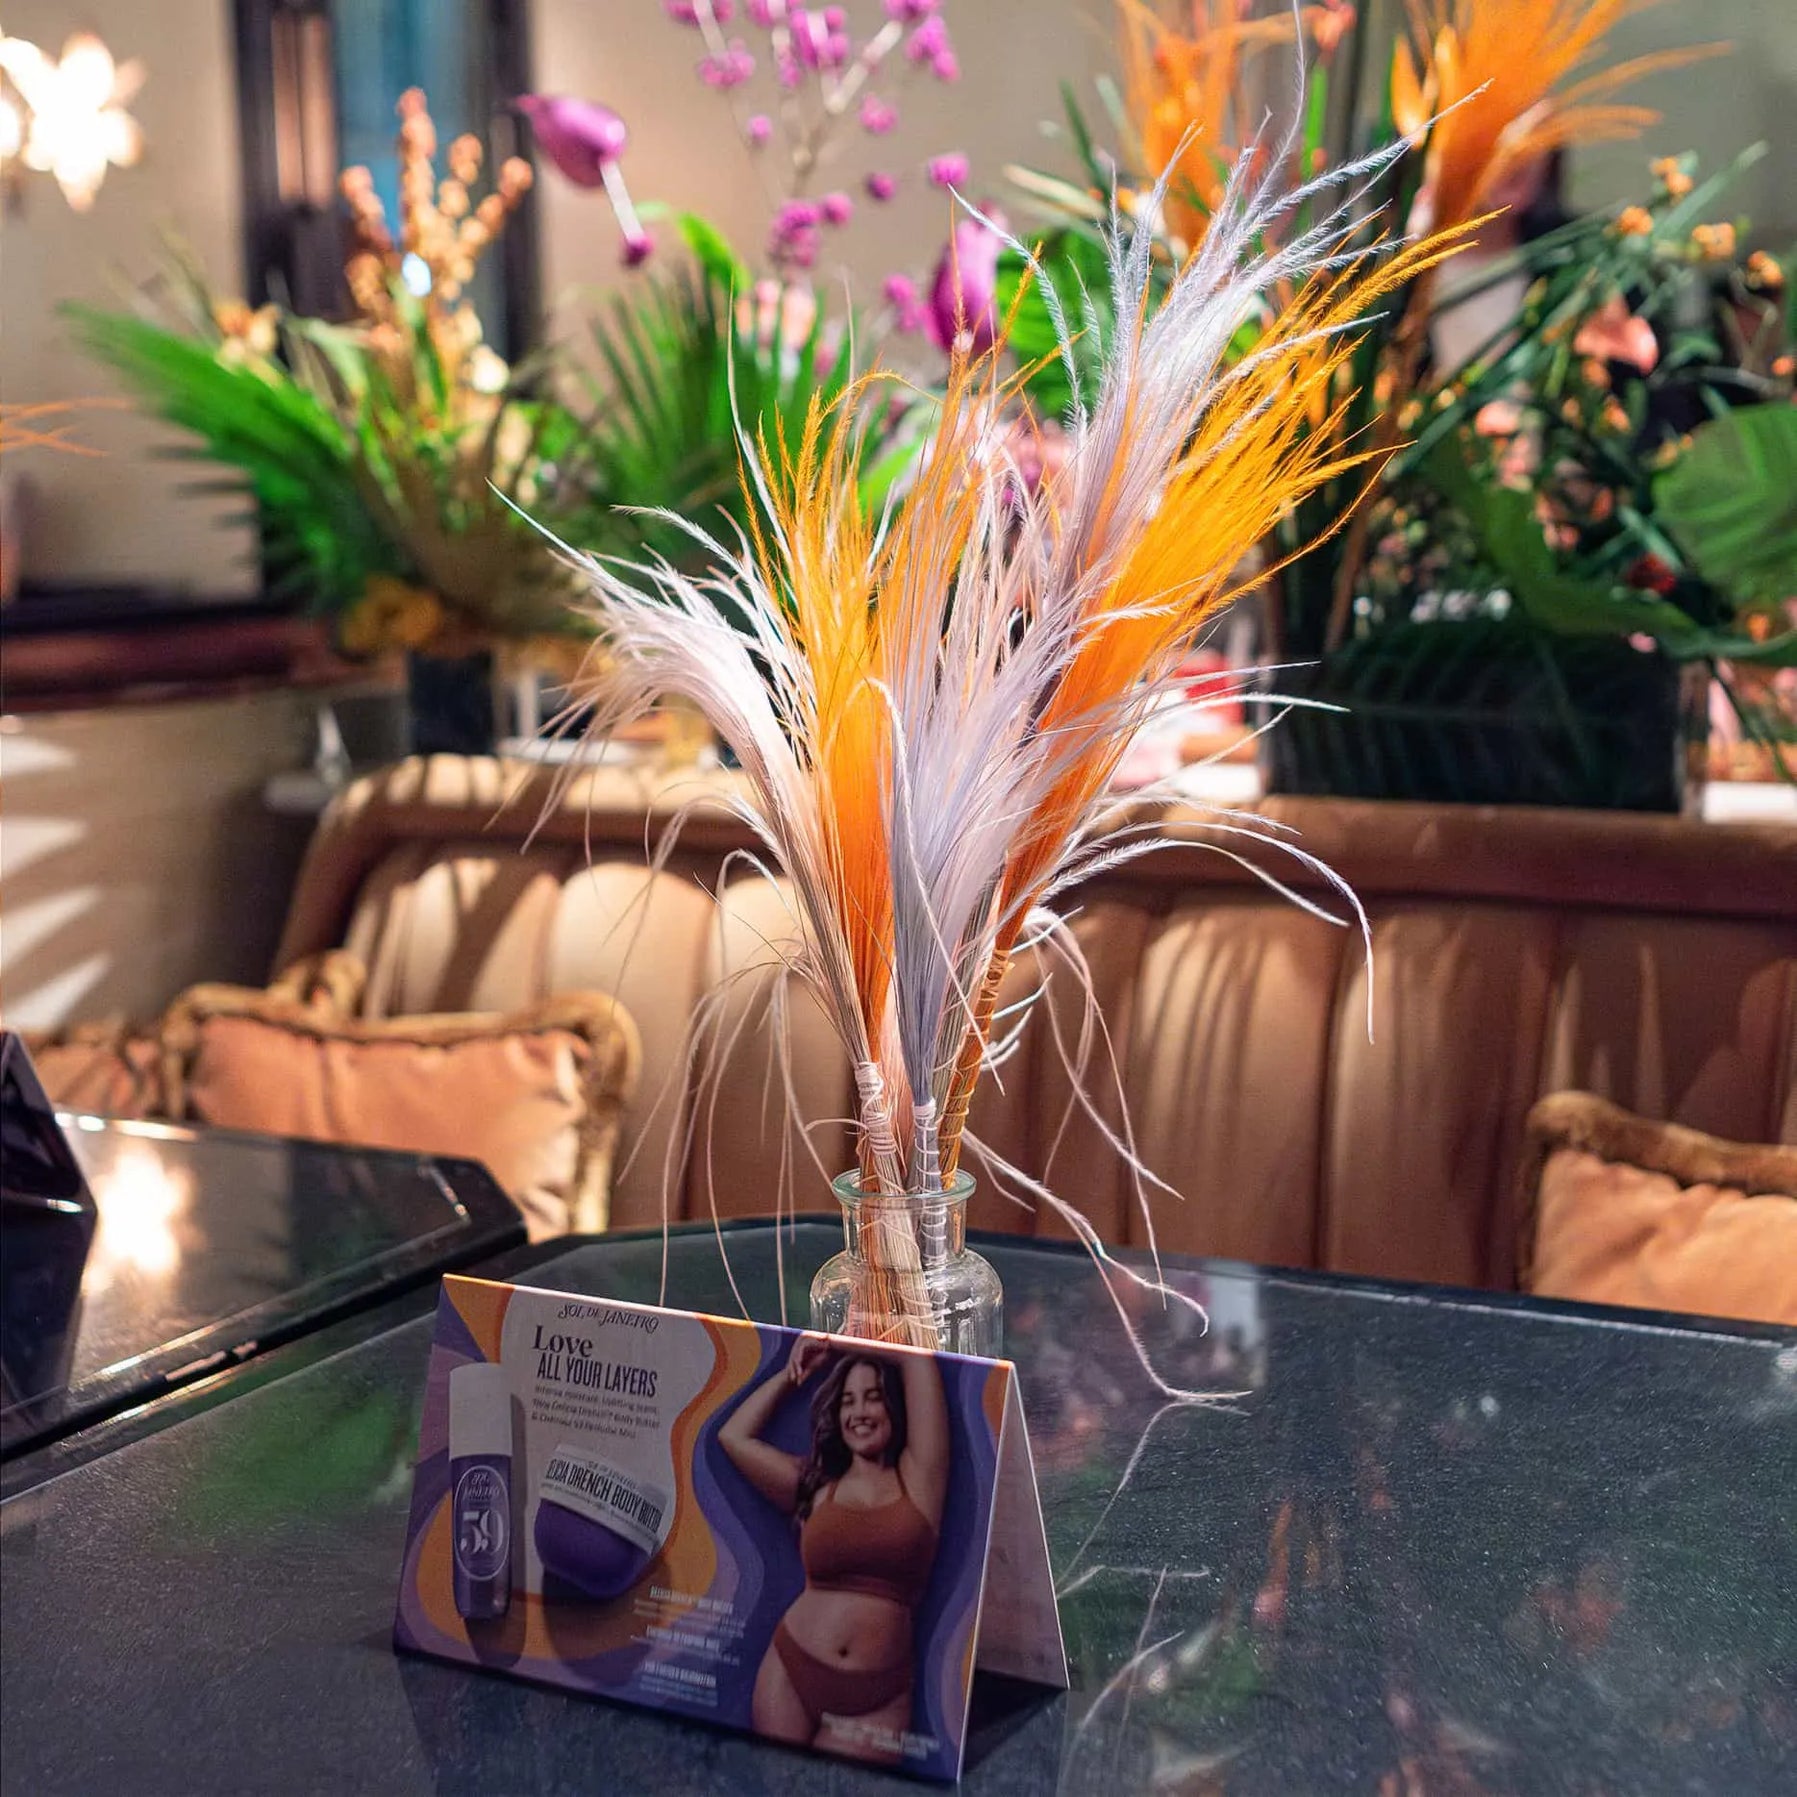 Sol de Janeiro promotional material displayed alongside a vibrant feather arrangement by Amaranté London in the sophisticated setting of Maine Mayfair restaurant.